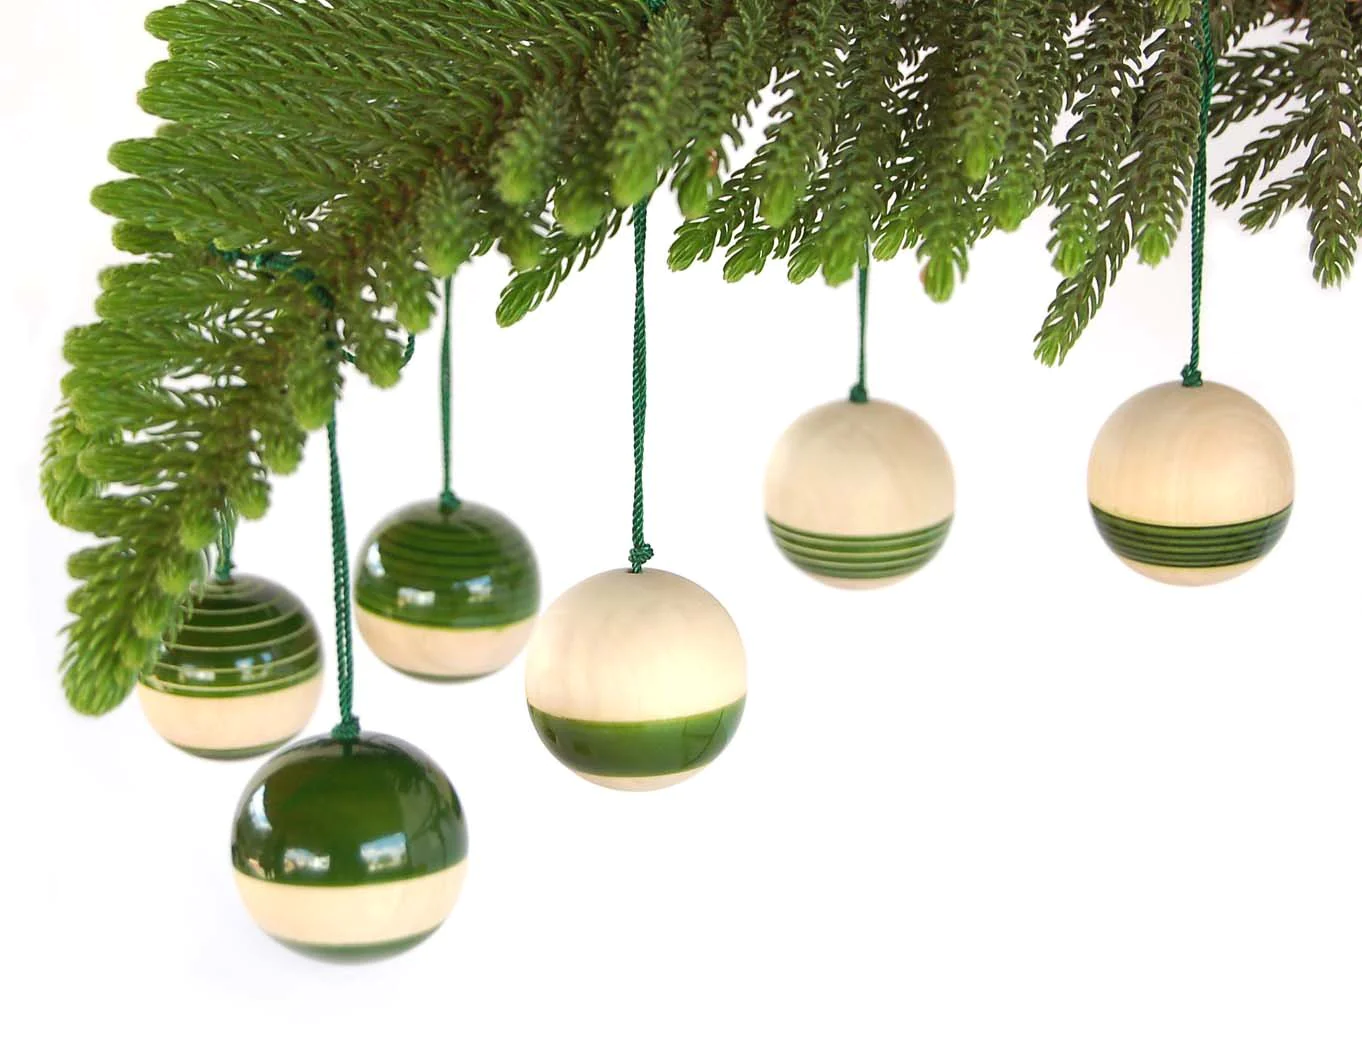 Handcrafted Wooden Christmas Decor Bubbles set of 6 - Green